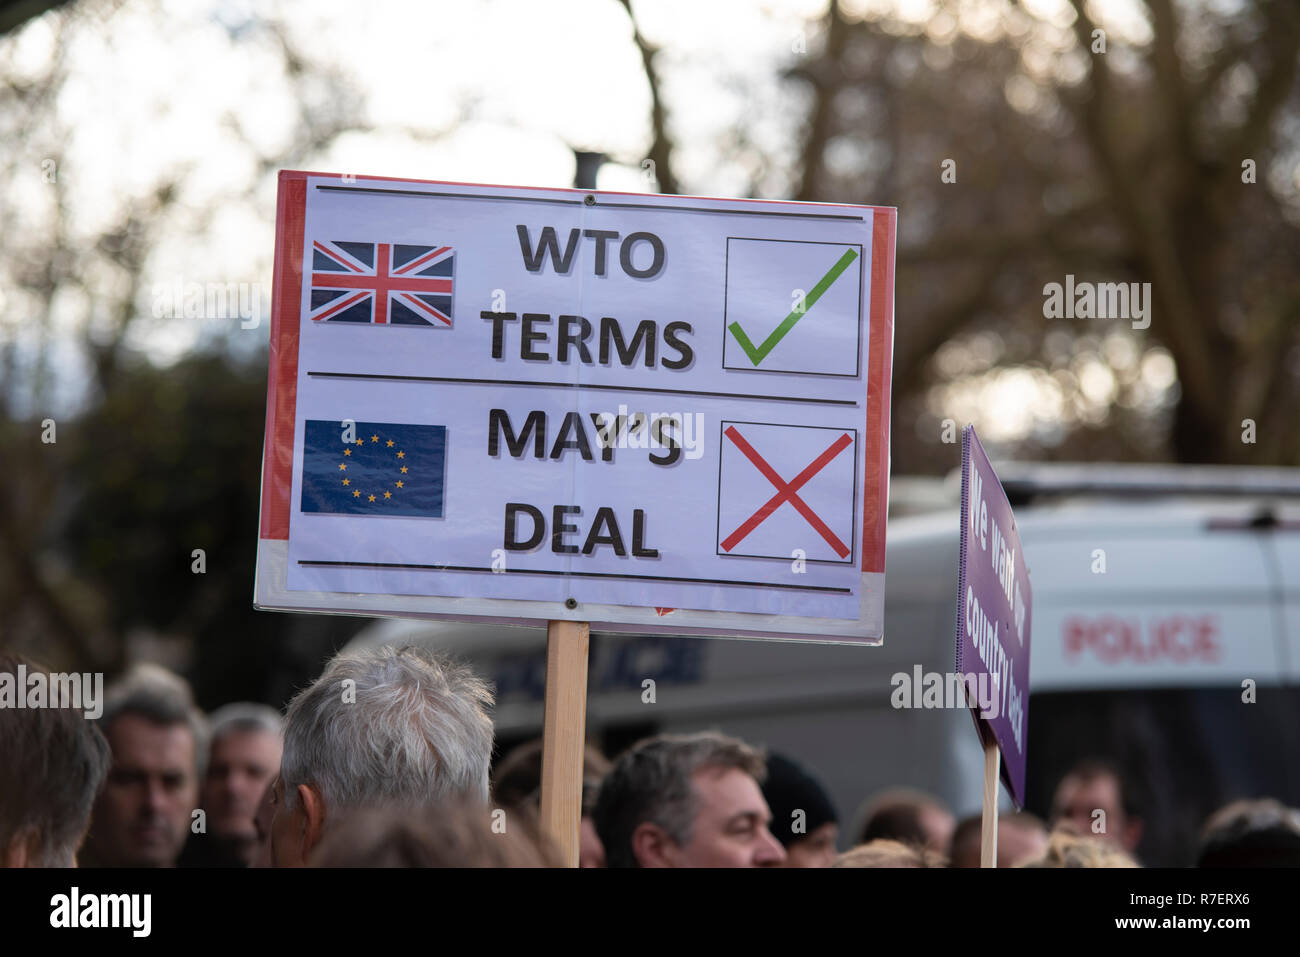 Brexit Betrayal march. Protesters are demonstrating at what they see as a betrayal by the UK government in not following through with leaving the EU in its entirety after the referendum. WTO Stock Photo